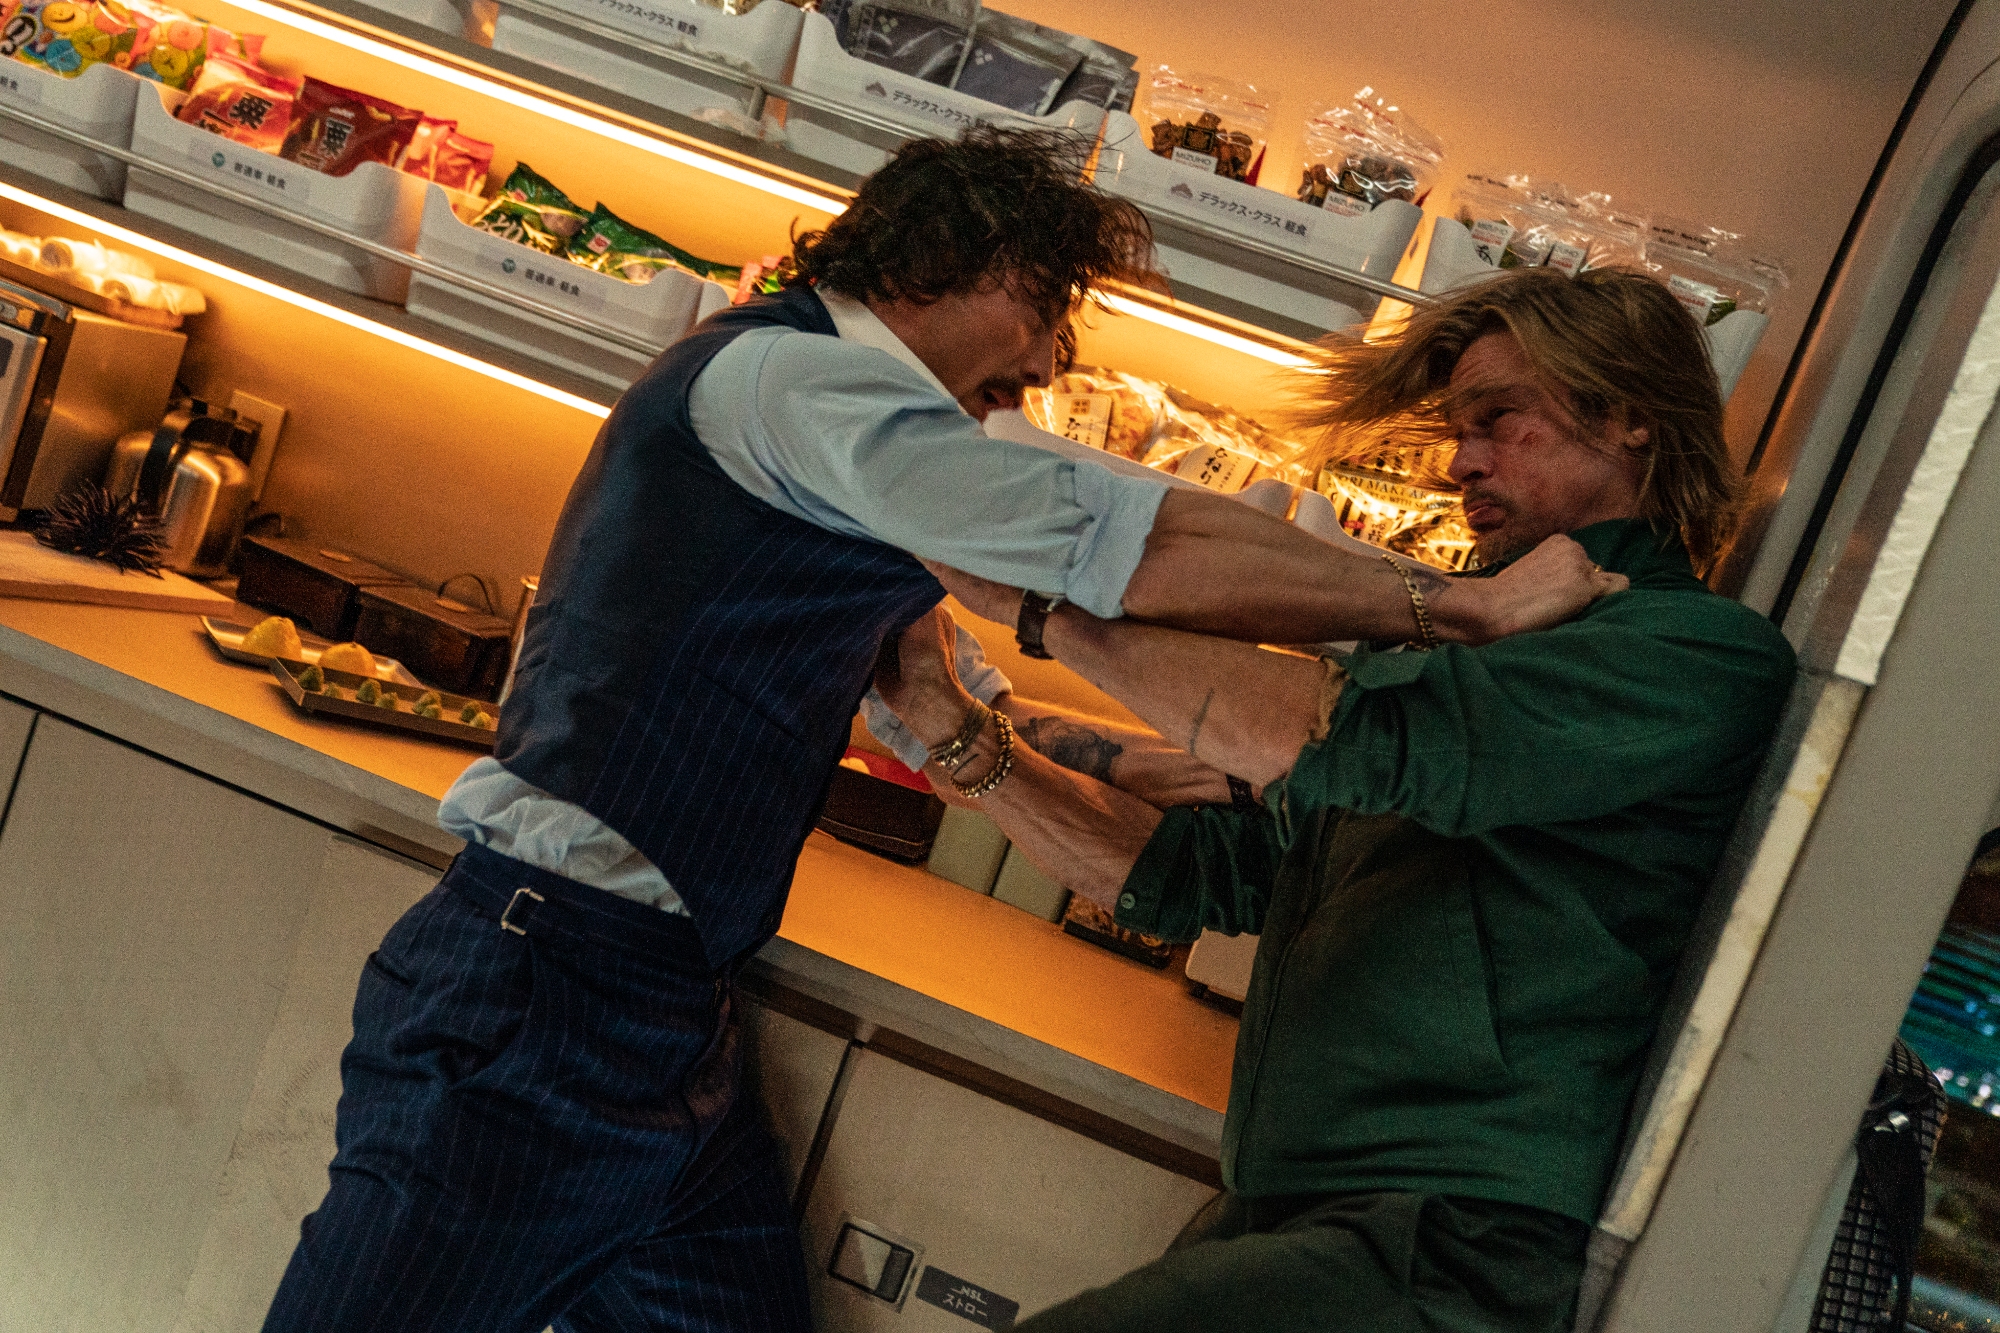 'Bullet Train' Aaron Taylor-Johnson as Tangerine and Brad Pitt as Ladybug fighting in front of a collection of the train snack counter